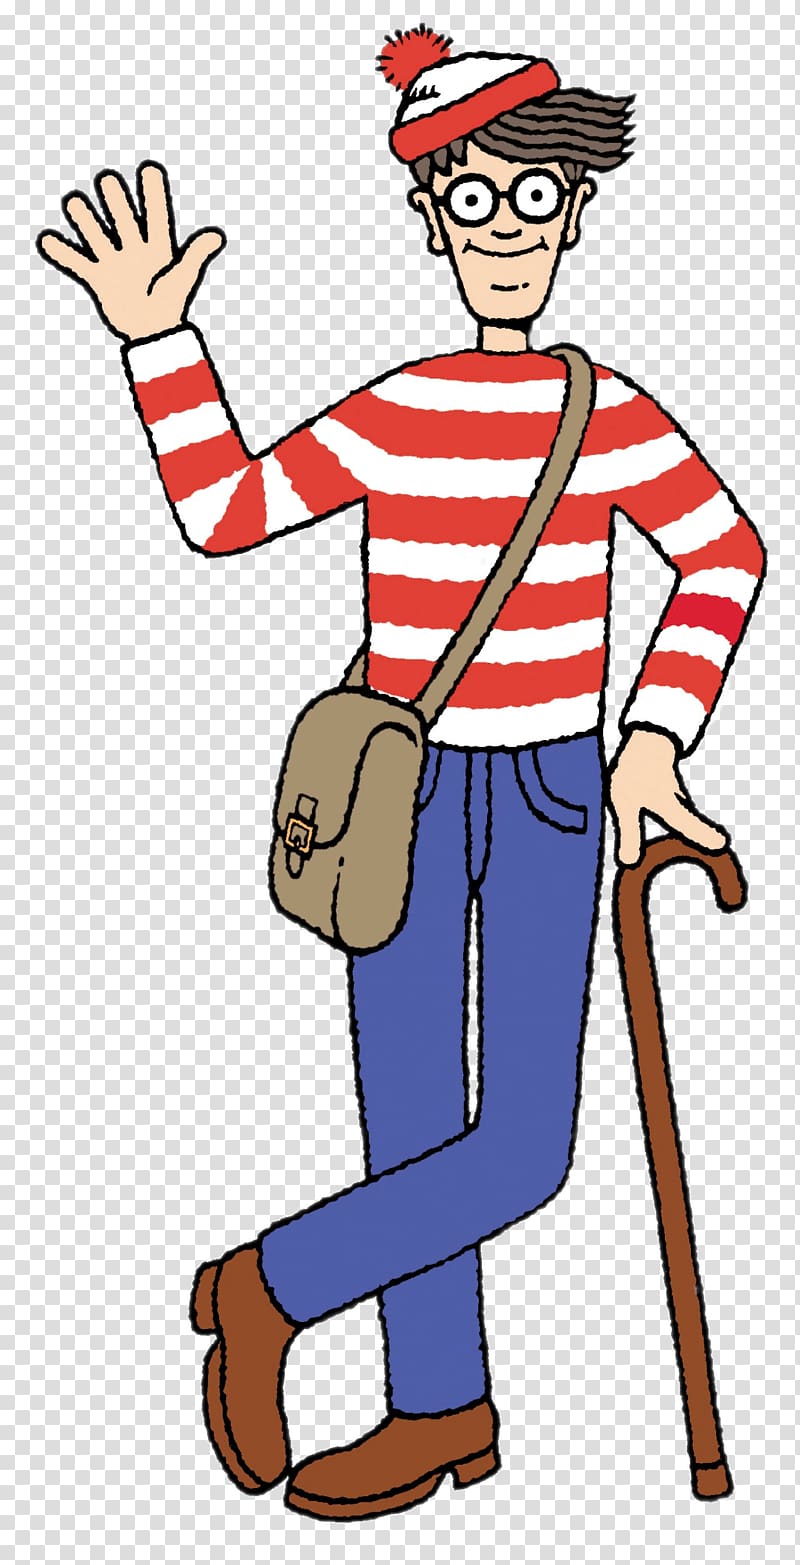 Waldo illustration, Wally Full Size transparent background PNG clipart